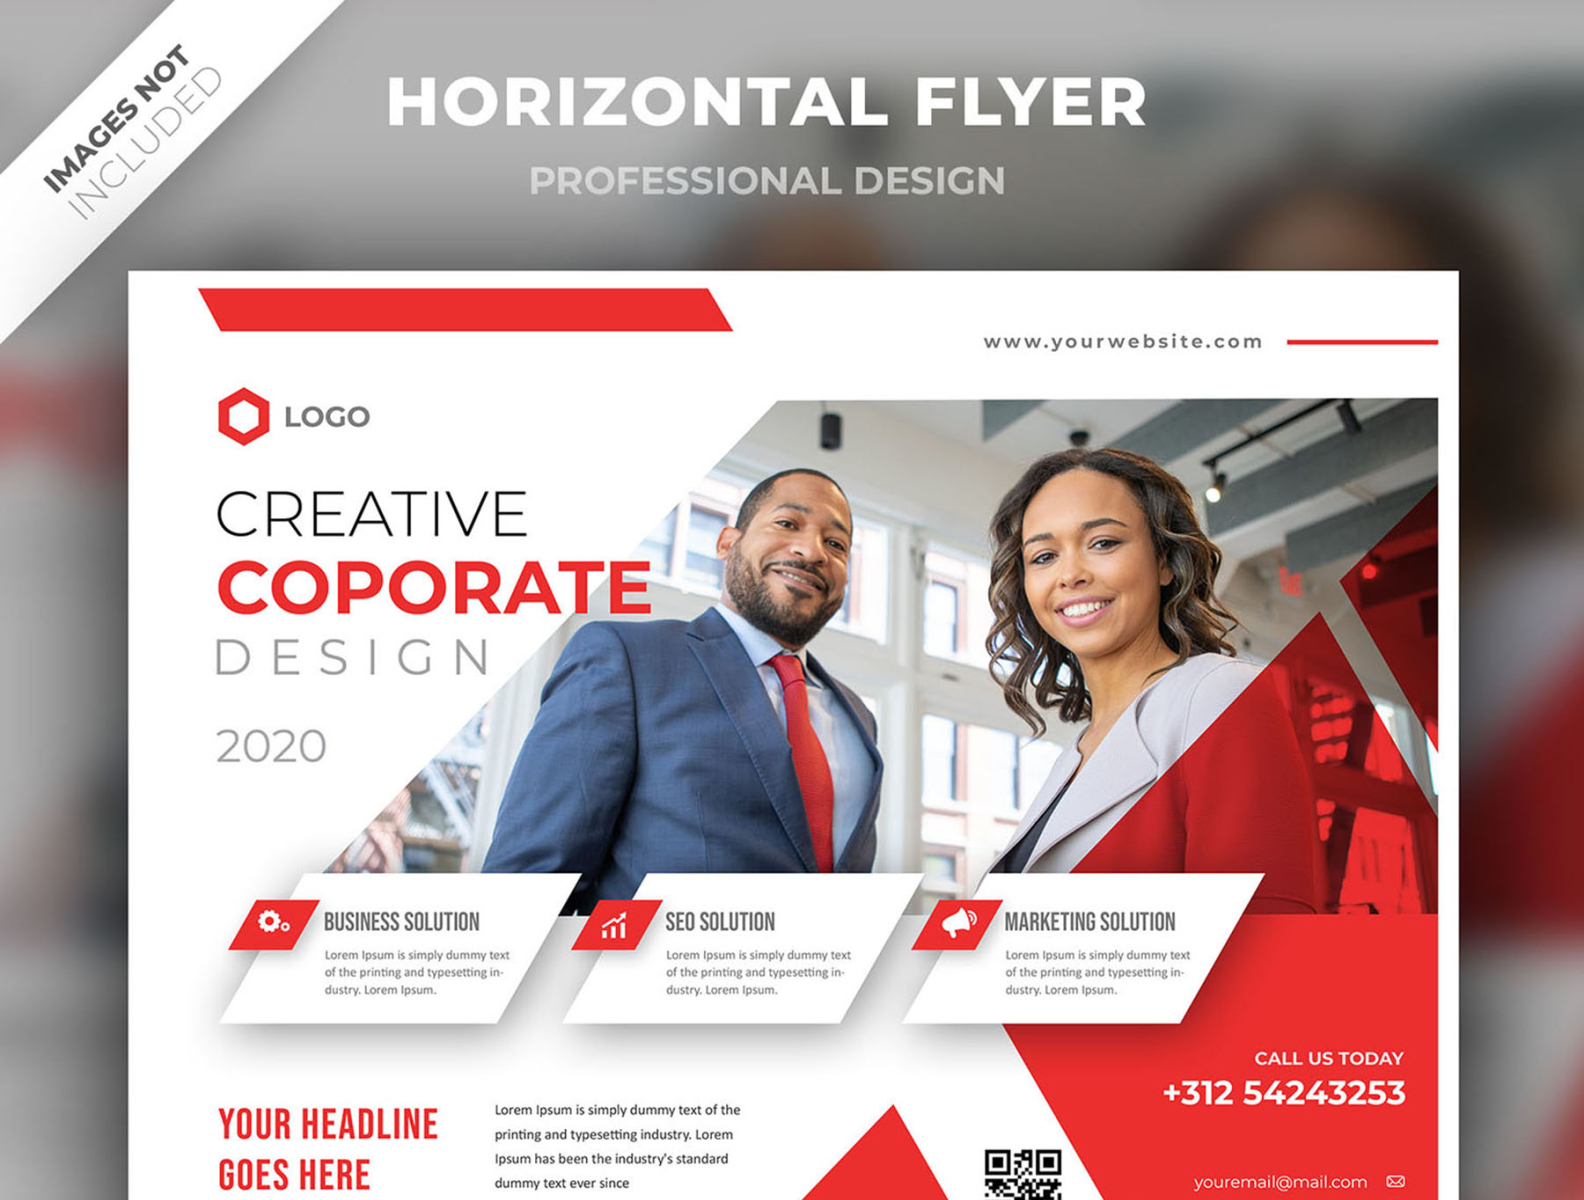 horizontal-flyer-design-by-graphic-arena-on-dribbble